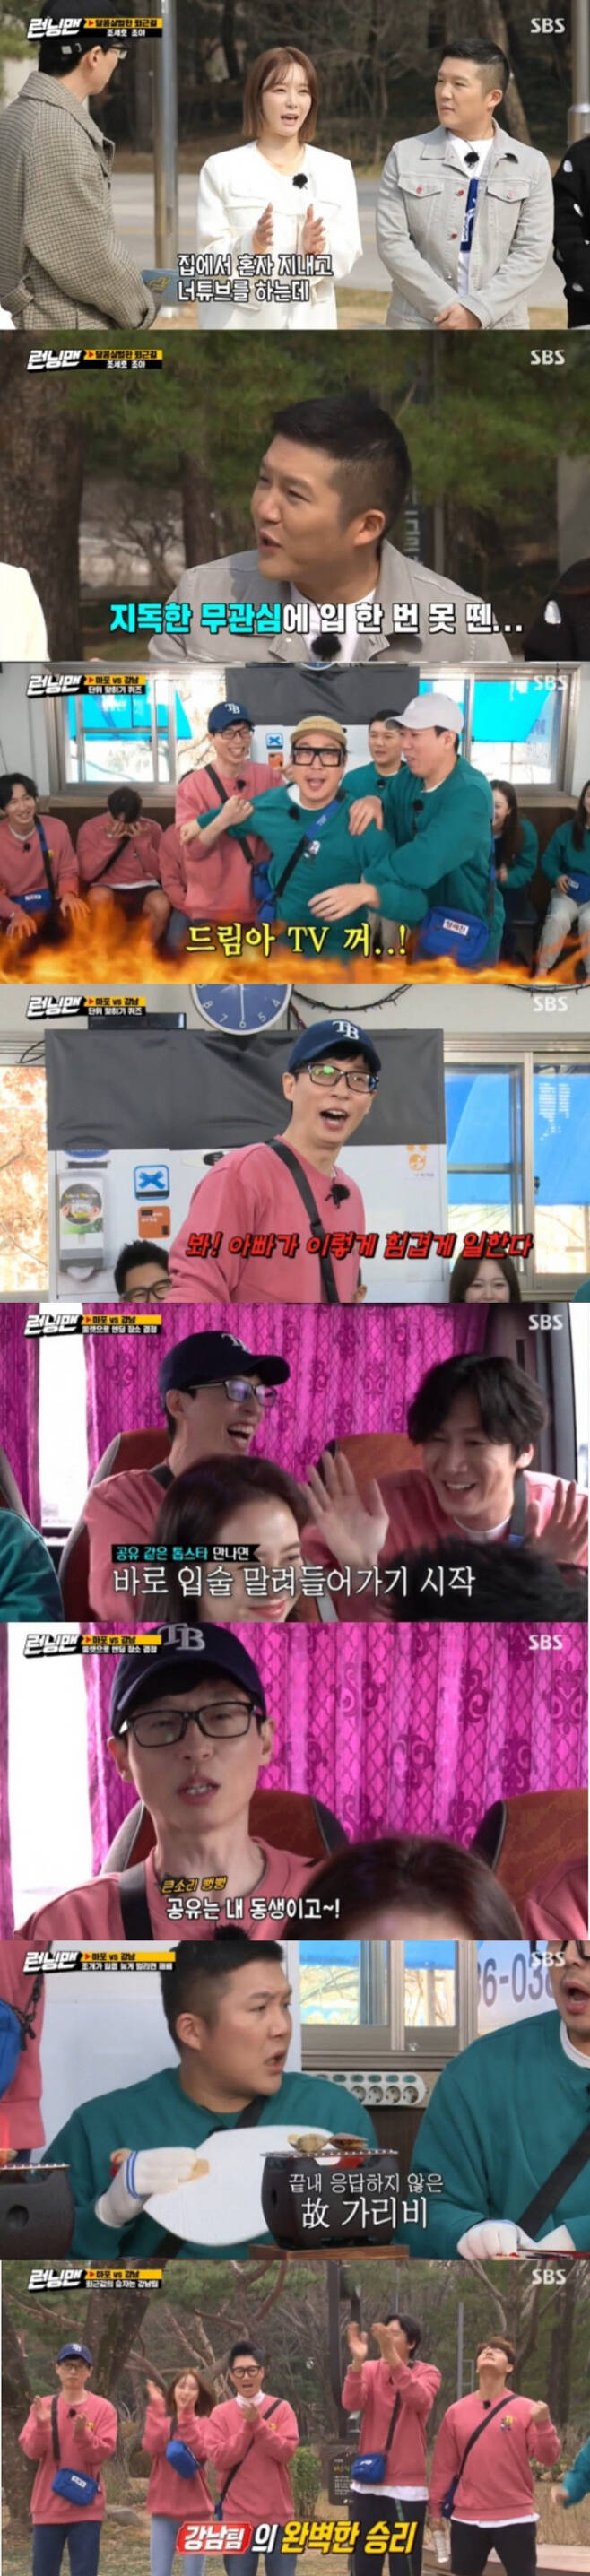 SBS Running Man kept the top spot in the same time zone of 2049 ratings.Running Man, which aired on the 11th (Sunday), ranked first in the same time zone with an average of 2.5% of SBSs main target, the 2049 ratings (hereinafter based on Nielsen Korea metropolitan area and households), and the highest audience rating per minute jumped to 6.5%.On this day, Race was decorated with Sweet and bloody work route race which is going to work after the ending shooting in the winning team area, and Jo Se-ho and Park Choa were invited as guests.Yoo Jae-Suk, Ji Seok-jin, Kim Jong-kook, Lee Kwang-soo, Park Choa were divided into Gangnam District Team, Haha, Song Ji-hyo, Jeon So-min, Yang Se-chan and Jo Se-ho were divided into DJ Maphorisa Team, and Gangnam District Team Kim Jong-kook won first place in the pre-mission He took the first mission place as Banpo.The first mission was a quiz, and the Gangnam District team, which was filled with brains, cheered.Unexpectedly, the Kang team continued to struggle, and DJ Maphorisa team took the victory by hitting the quiz problem in succession.DJ Maphorisa team Choices Dongbinggo-dong as next mission sitePark Choa and Jo Se-ho laughed with a variety of recent talk.Park Choa, who joined the Running Man in six years, said, I have been watching TV for three years and I am familiar with it.Jo Se-ho disclosed the privacy of Lee Kwang-soo and Yoo Jae-Suk with health field talk.Jo Se-ho started the talk by describing Lee Kwang-soos distorted expression, saying, Lee Kwang-soo does health with the weight that should not be done. Lee Kwang-soo said, Yoo Jae-Suk points out when he meets Jo Se-ho at the gym, He laughed.On the other hand, the Gangnam District team won all the missions in Dongbinggo-dong and Gangnam District, preoccupied the advantageous highlands, and won the final mission in Yeoksam-dong with Park Choas performance.In the end, the final ending area was also Choicesed to Gangnam District, which secured a lot of roulette compartments, and Gangnam District Ending was conducted.The Gangnam District team took the famous rice cake set of Gangnam District, and DJ Maphorisa team had the bad luck of going to a long workday.The scene was the highest audience rating of 6.5% per minute, accounting for the best one minute.SBS Running Man is broadcast every Sunday at 5 pm.